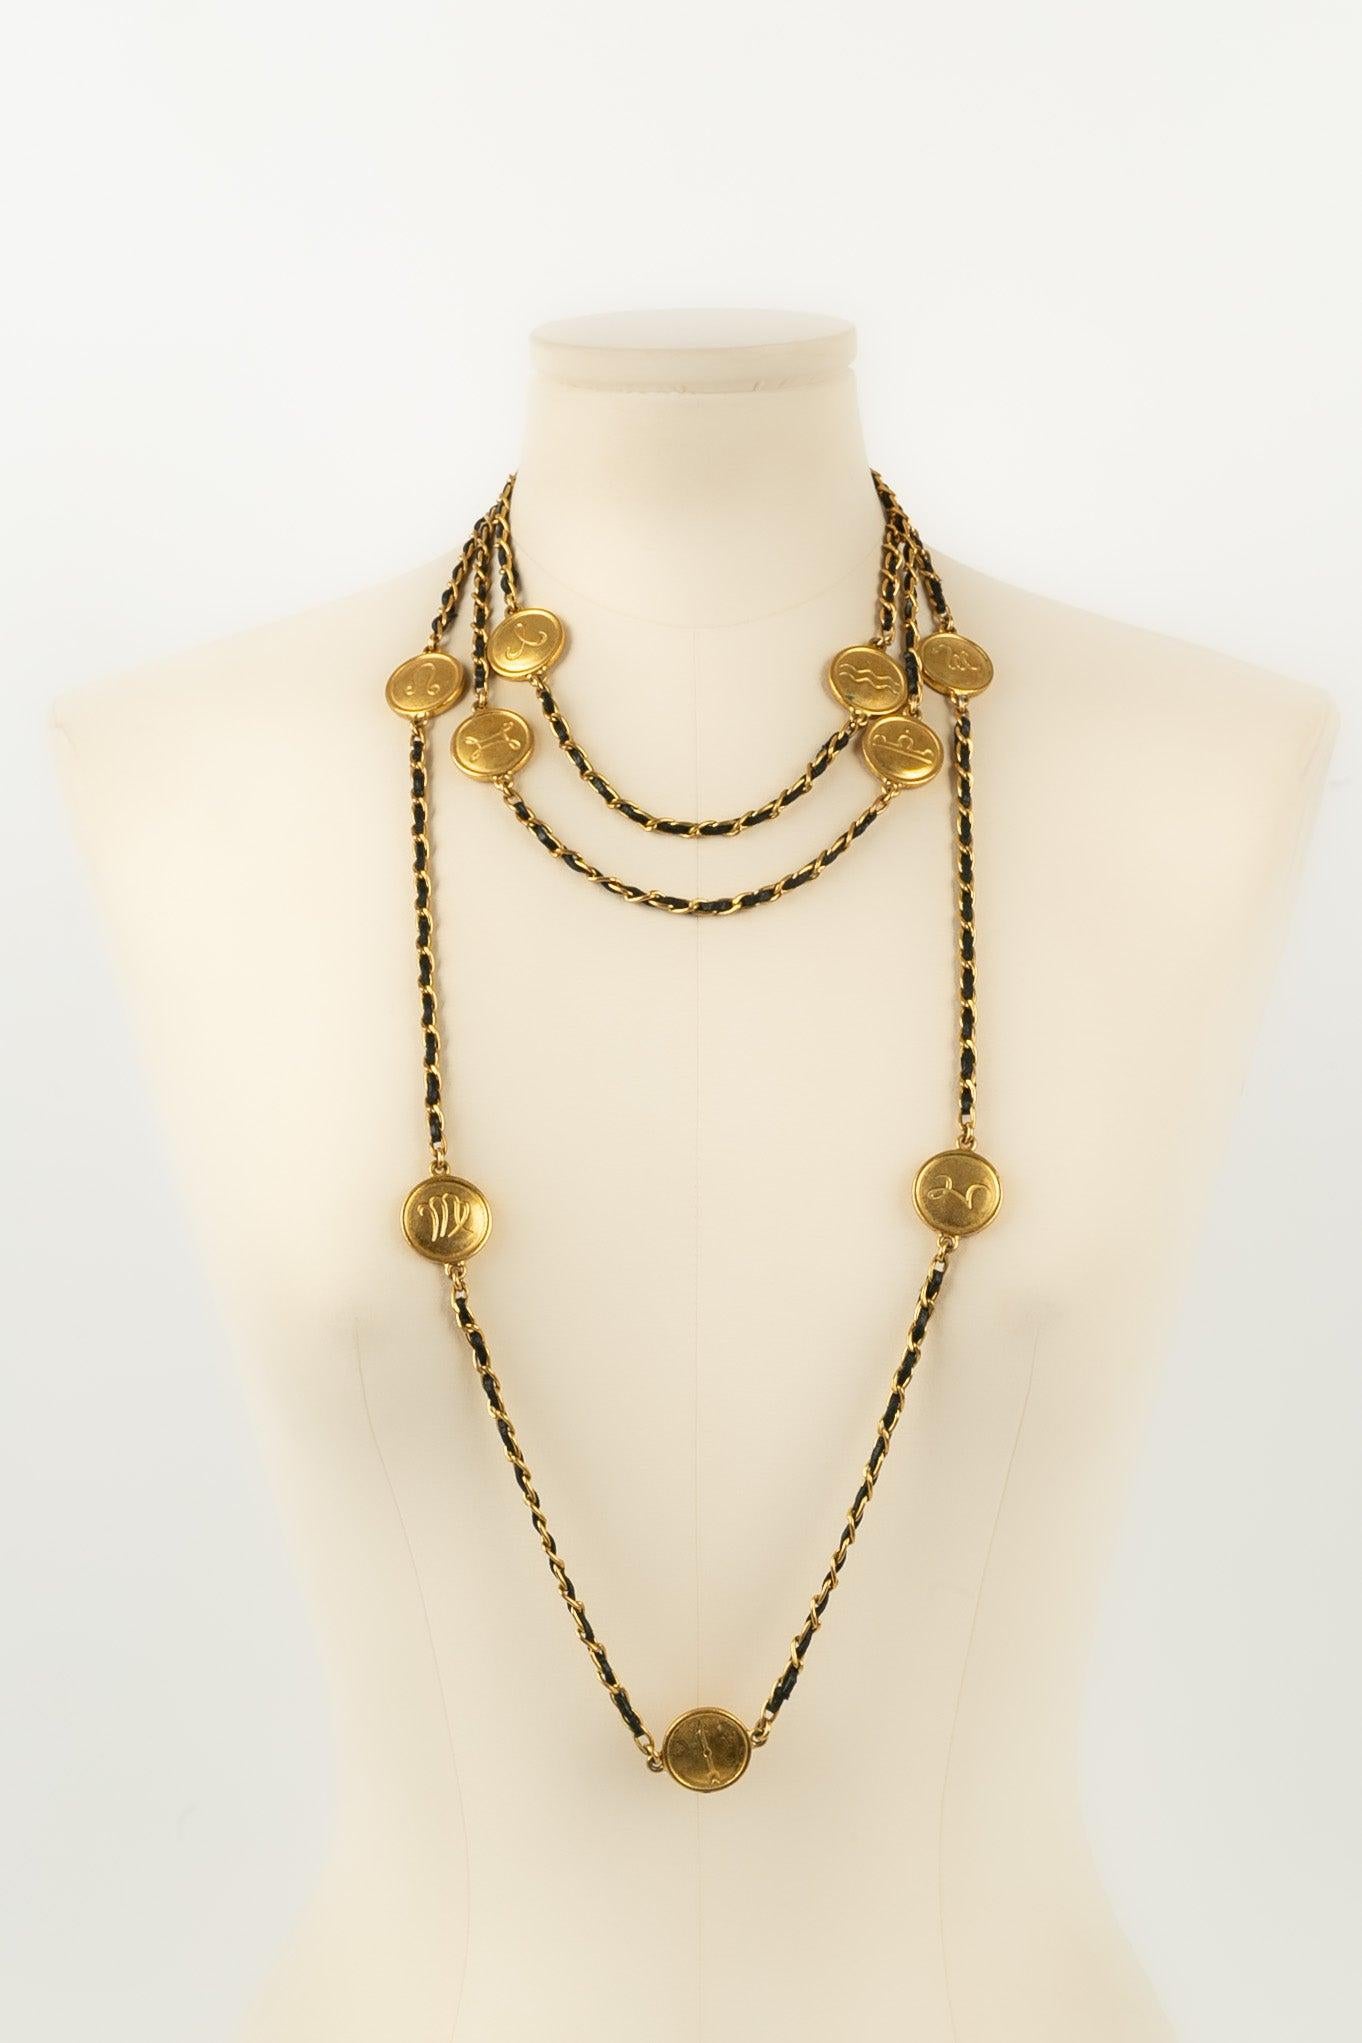 Chanel Necklace / Sautoir in Gold-Plated Metal, 1995 In Excellent Condition For Sale In SAINT-OUEN-SUR-SEINE, FR